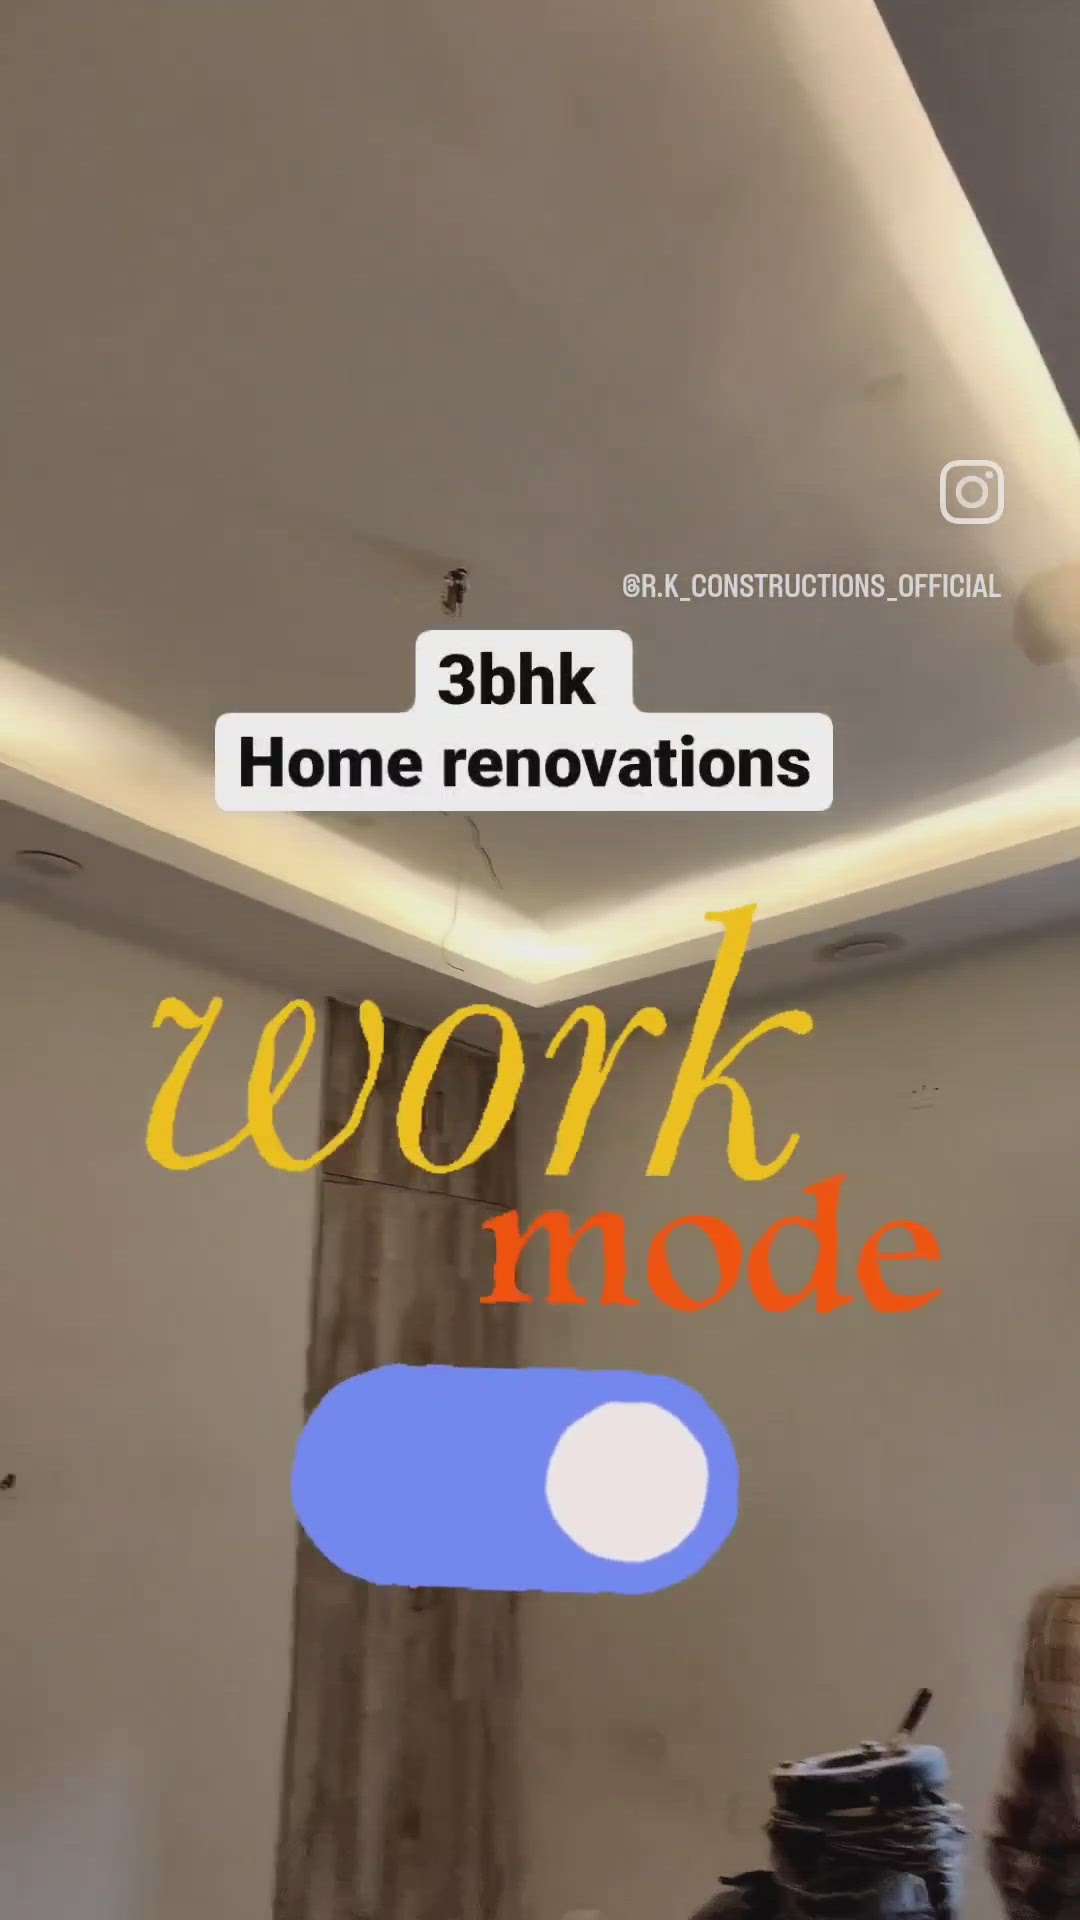 3bhk home renovations is just 10lav only  #HouseRenovation #KitchenRenovation #electricalwork #sanitarywares 
contact :- 8287157658